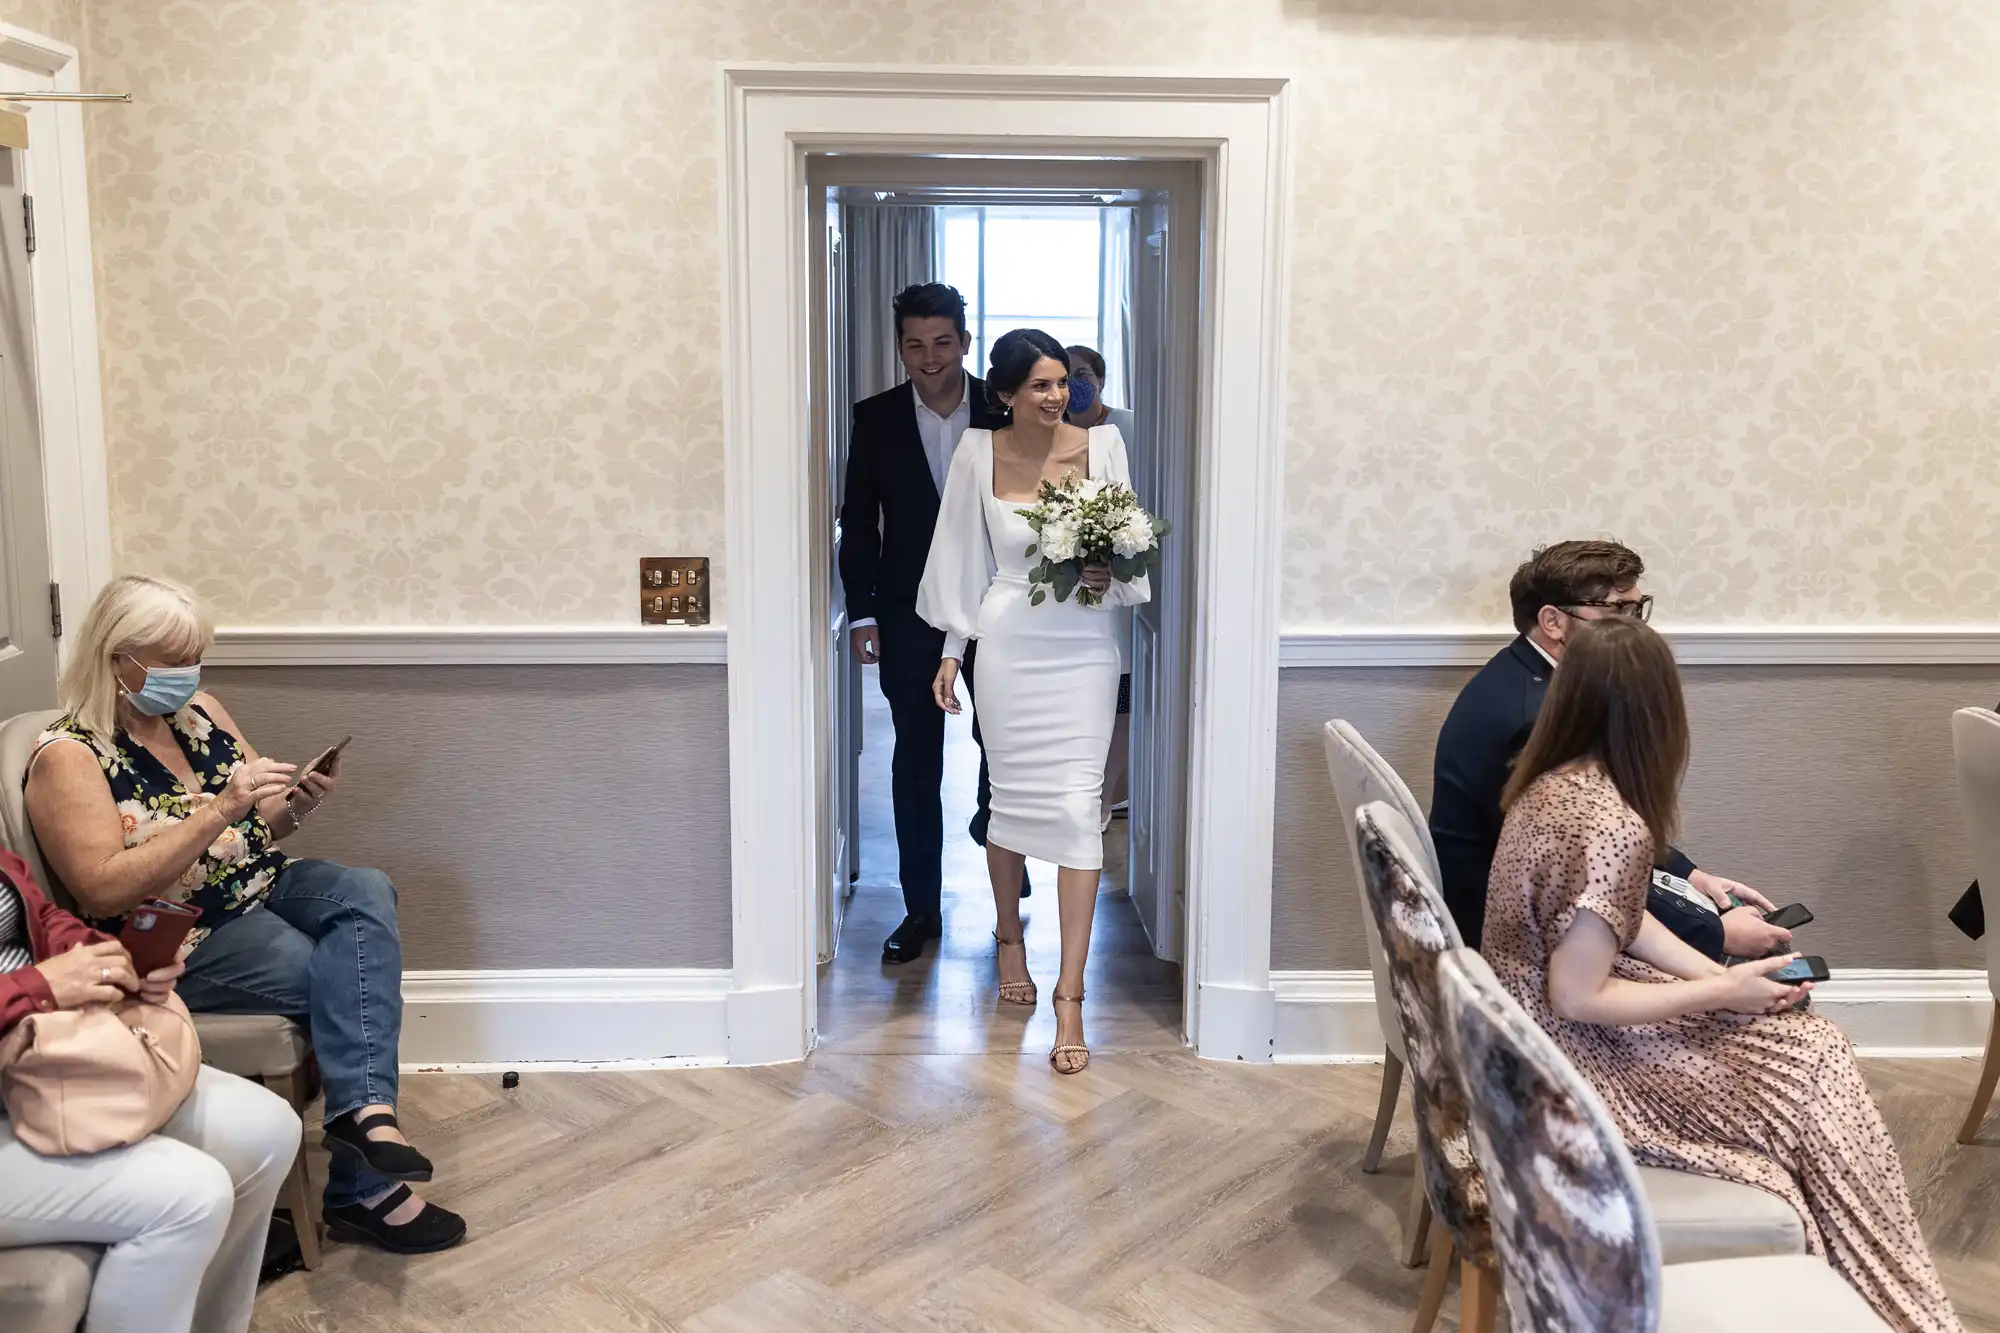 A bride and groom walking through a doorway smiling, while seated guests look at their phones, in an elegantly decorated room.